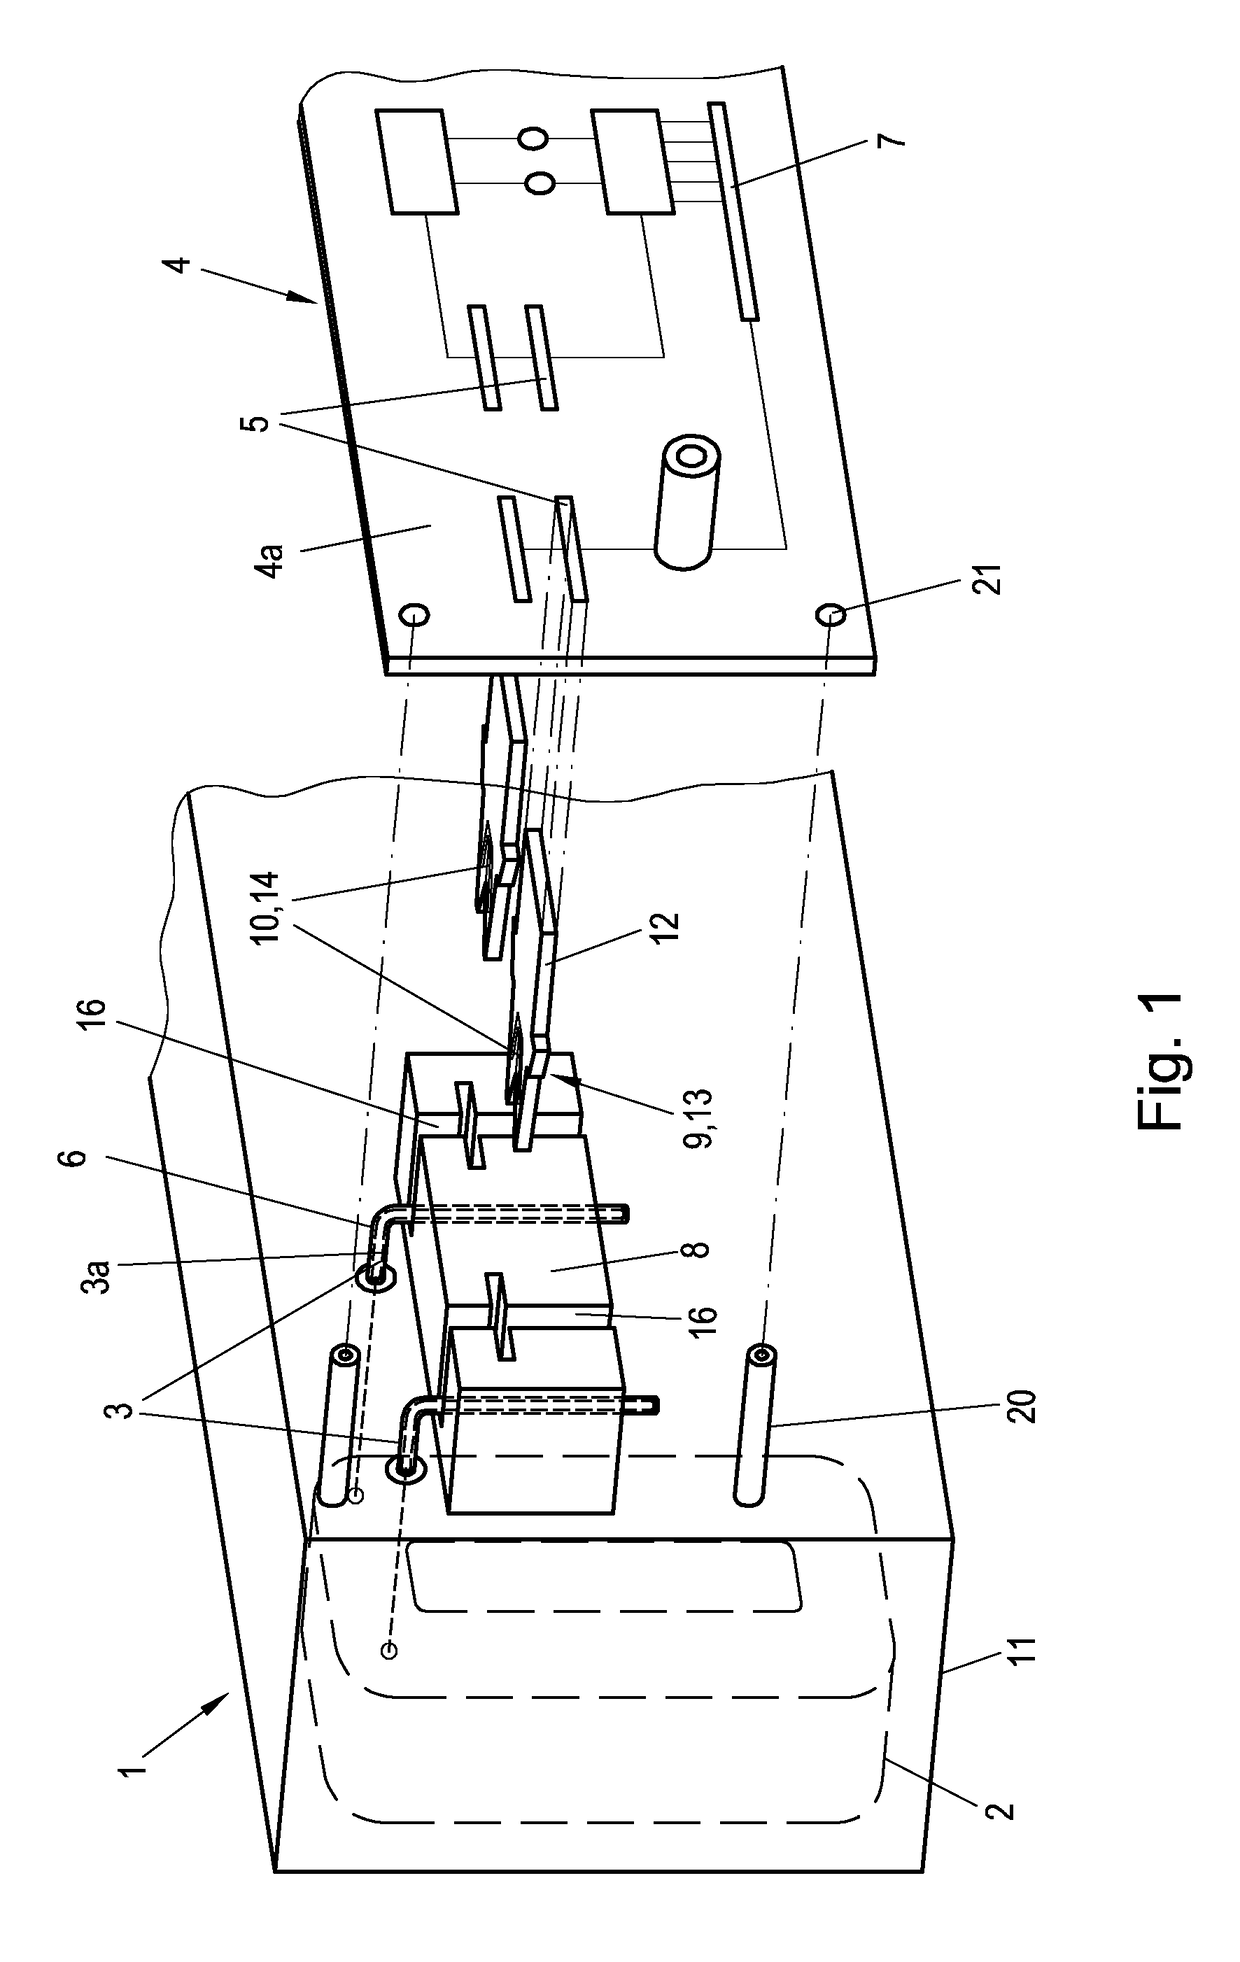 Assembly procedure for a long-stator linear motor